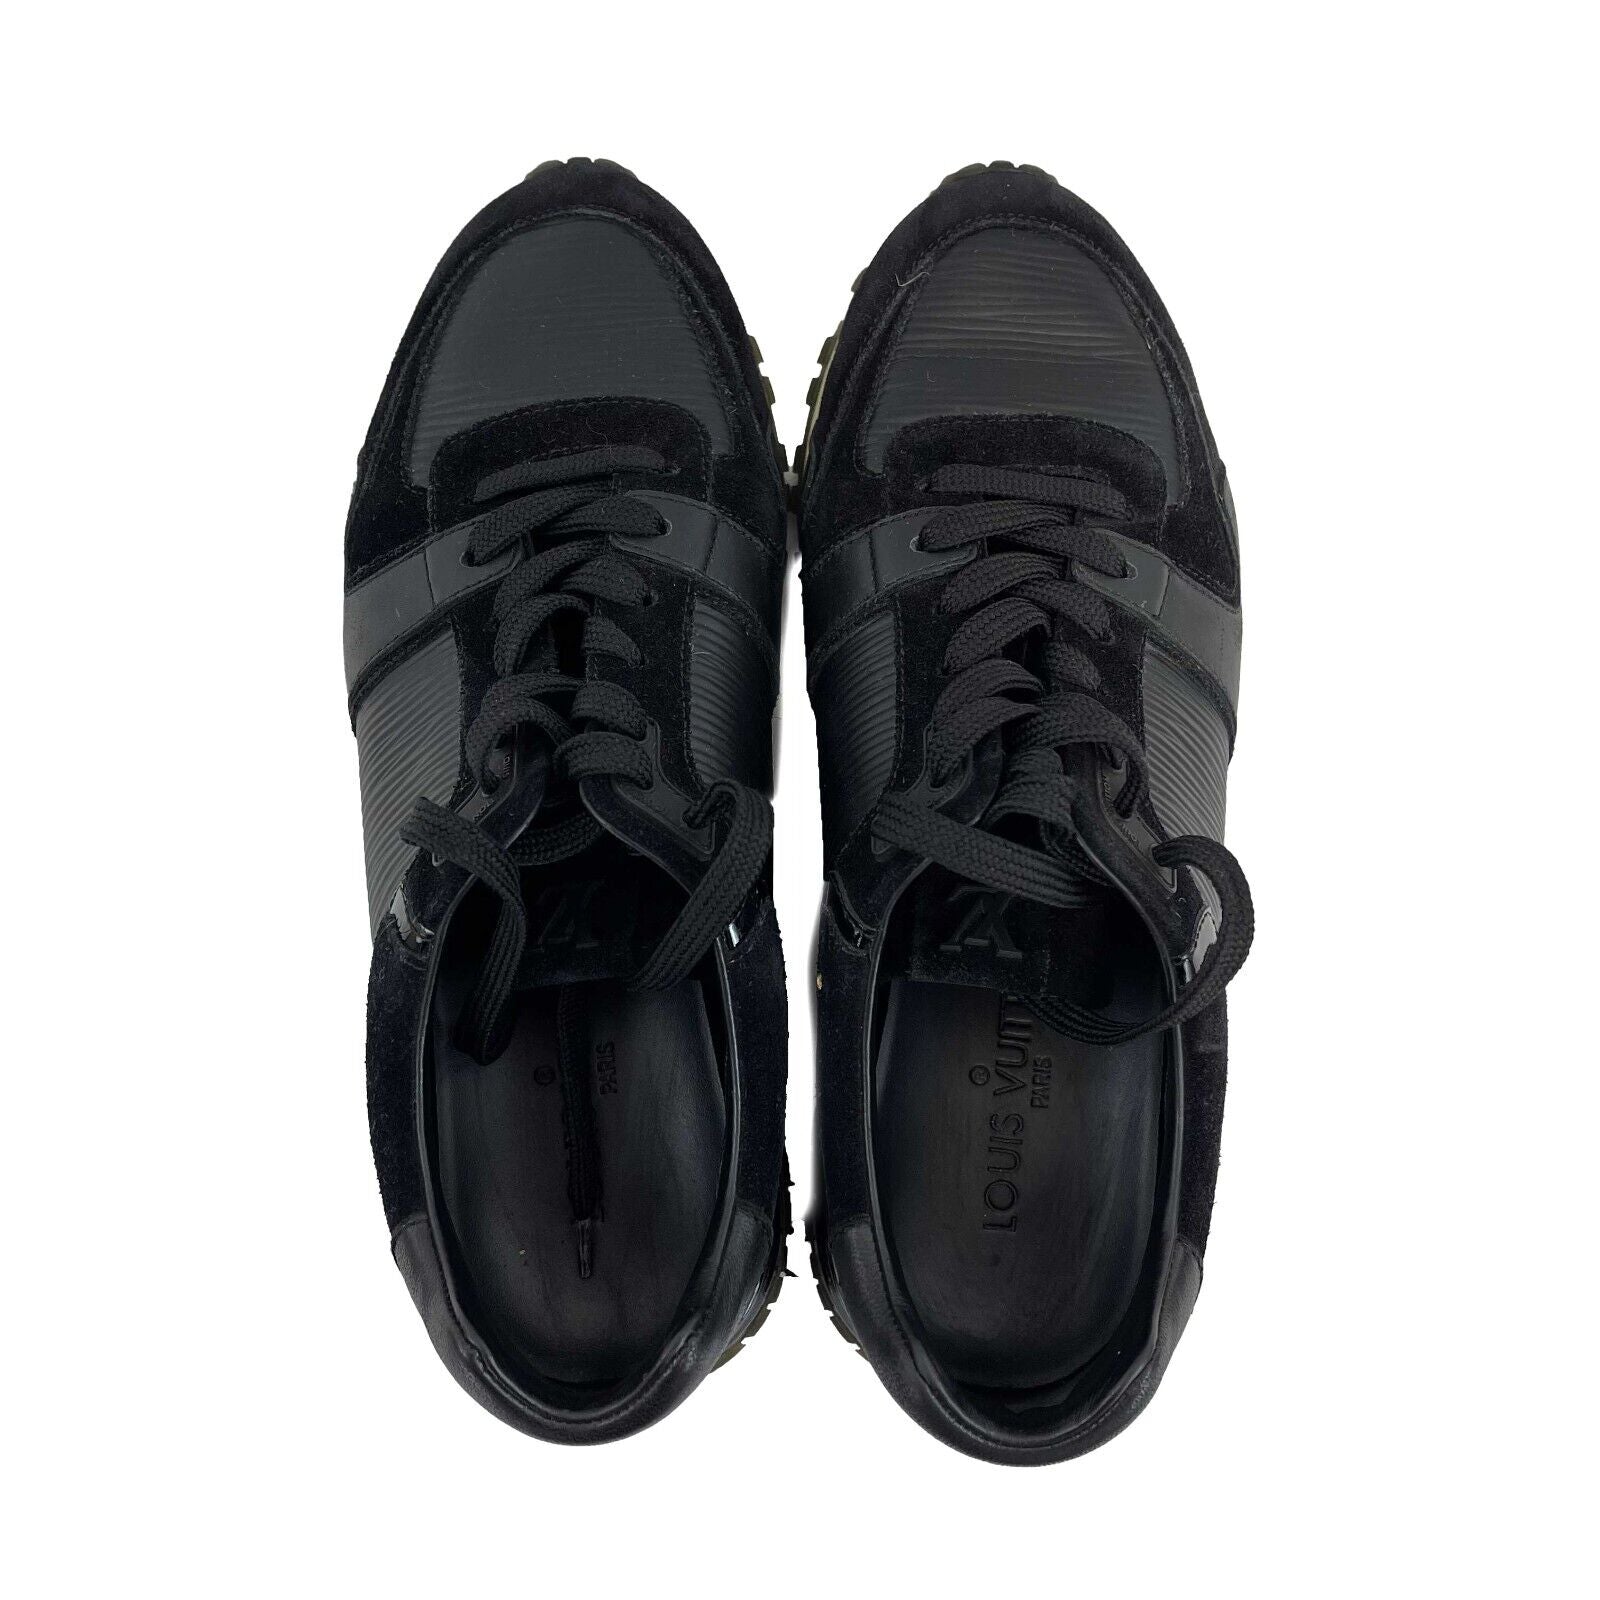 Run away leather trainers Louis Vuitton Black size 37.5 EU in Leather -  21065881